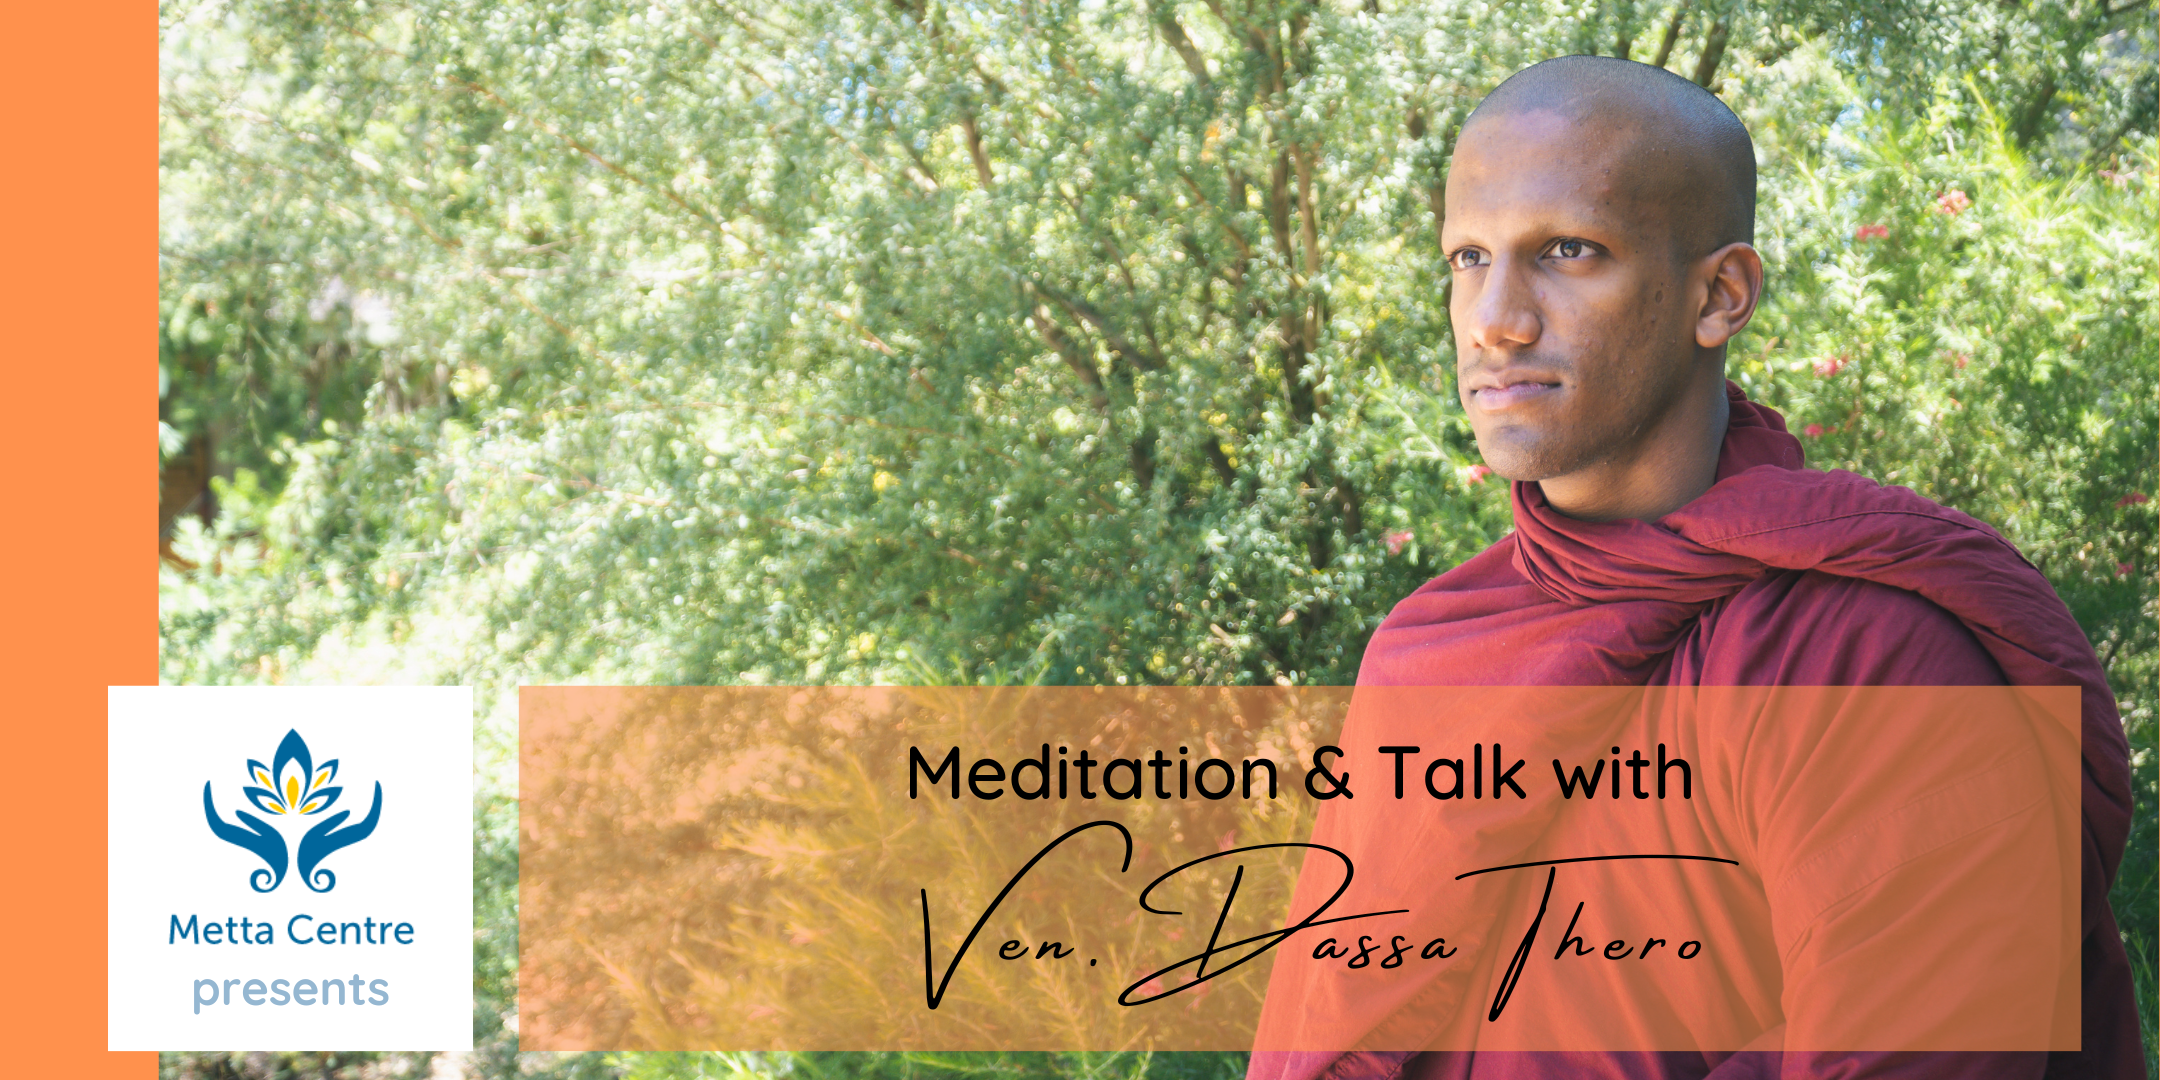 Overcoming Addiction through Buddhist practices: a Mind Lab event